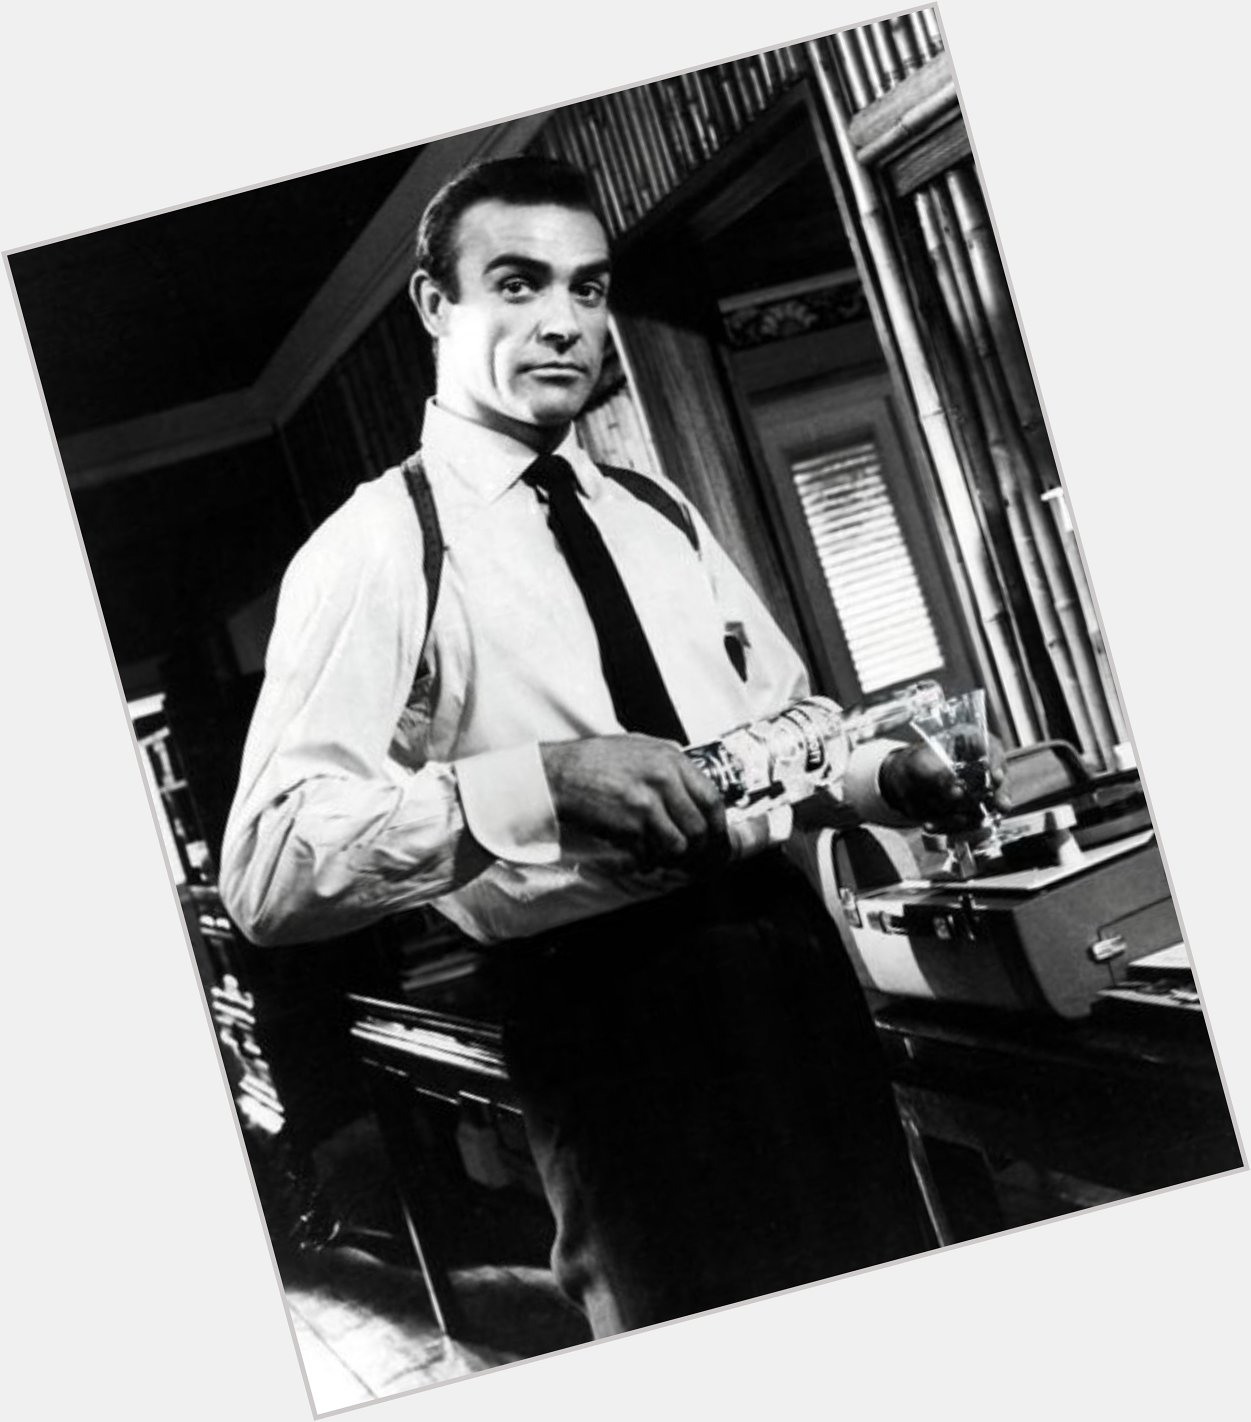 Happy 90th birthday to Connery. Sean Connery! He is aging like a fine Scotch! 